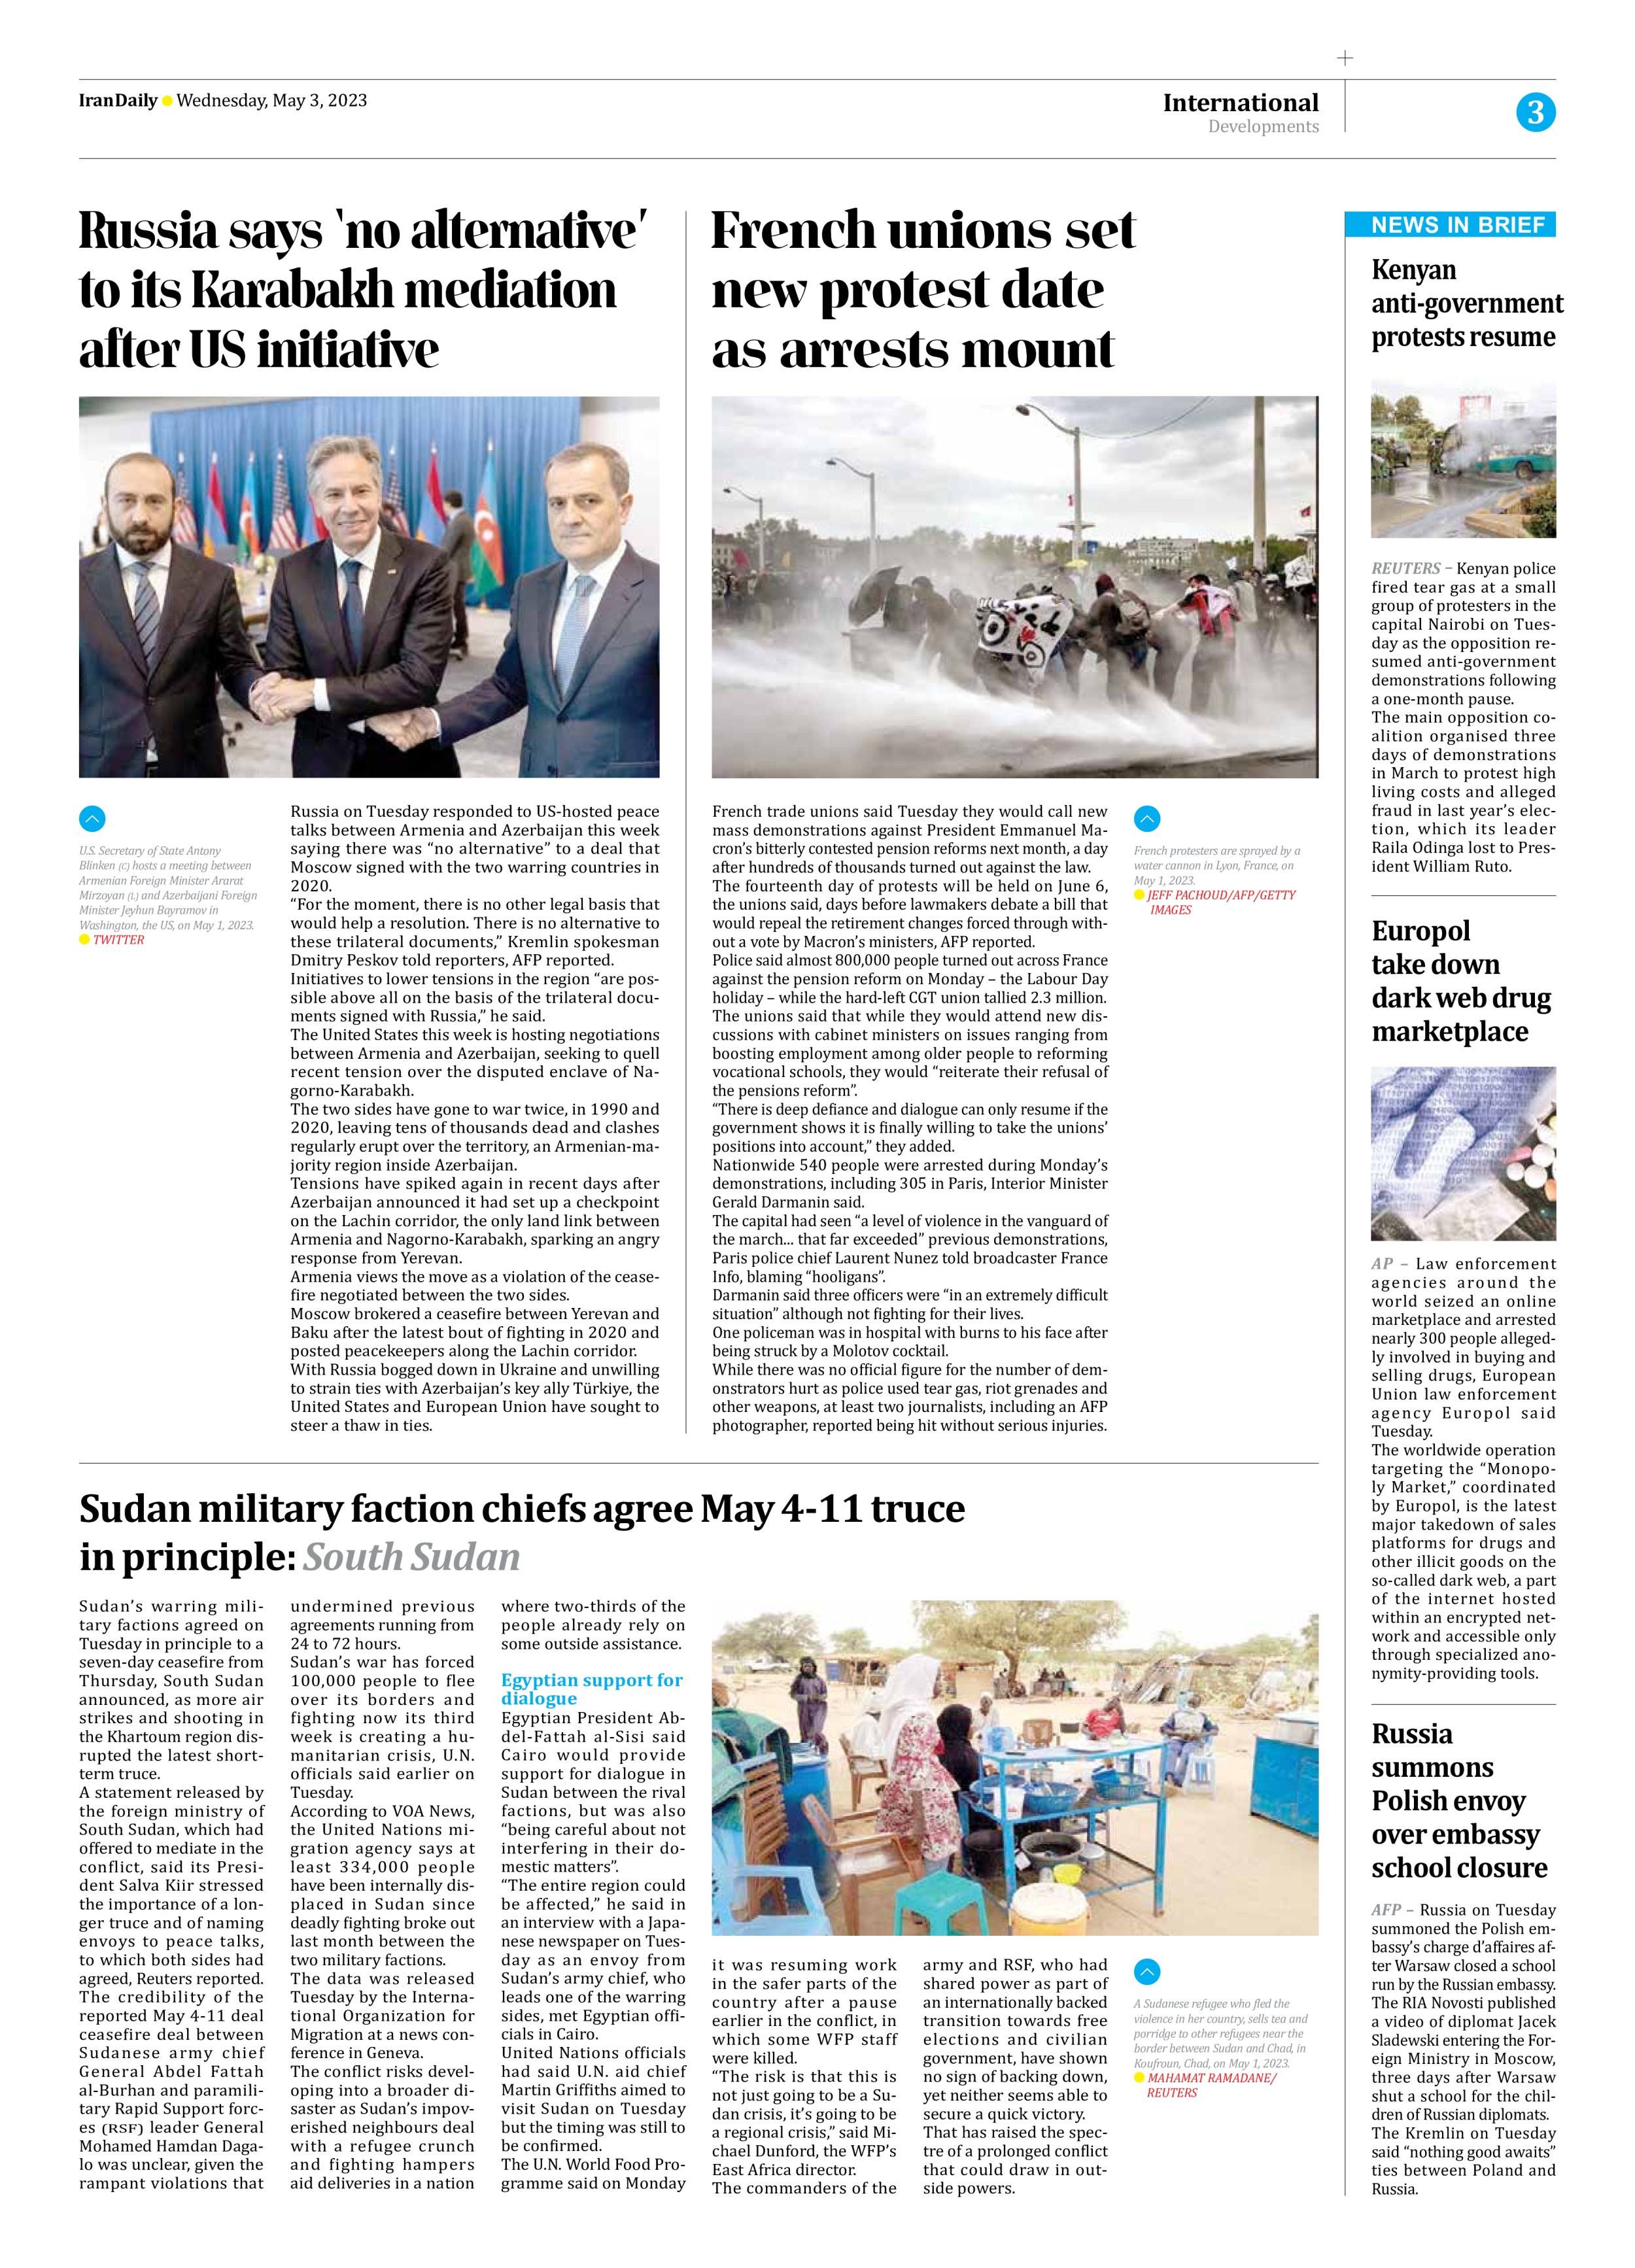 Iran Daily - Number Seven Thousand Two Hundred and Eighty Two - 03 May 2023 - Page 3